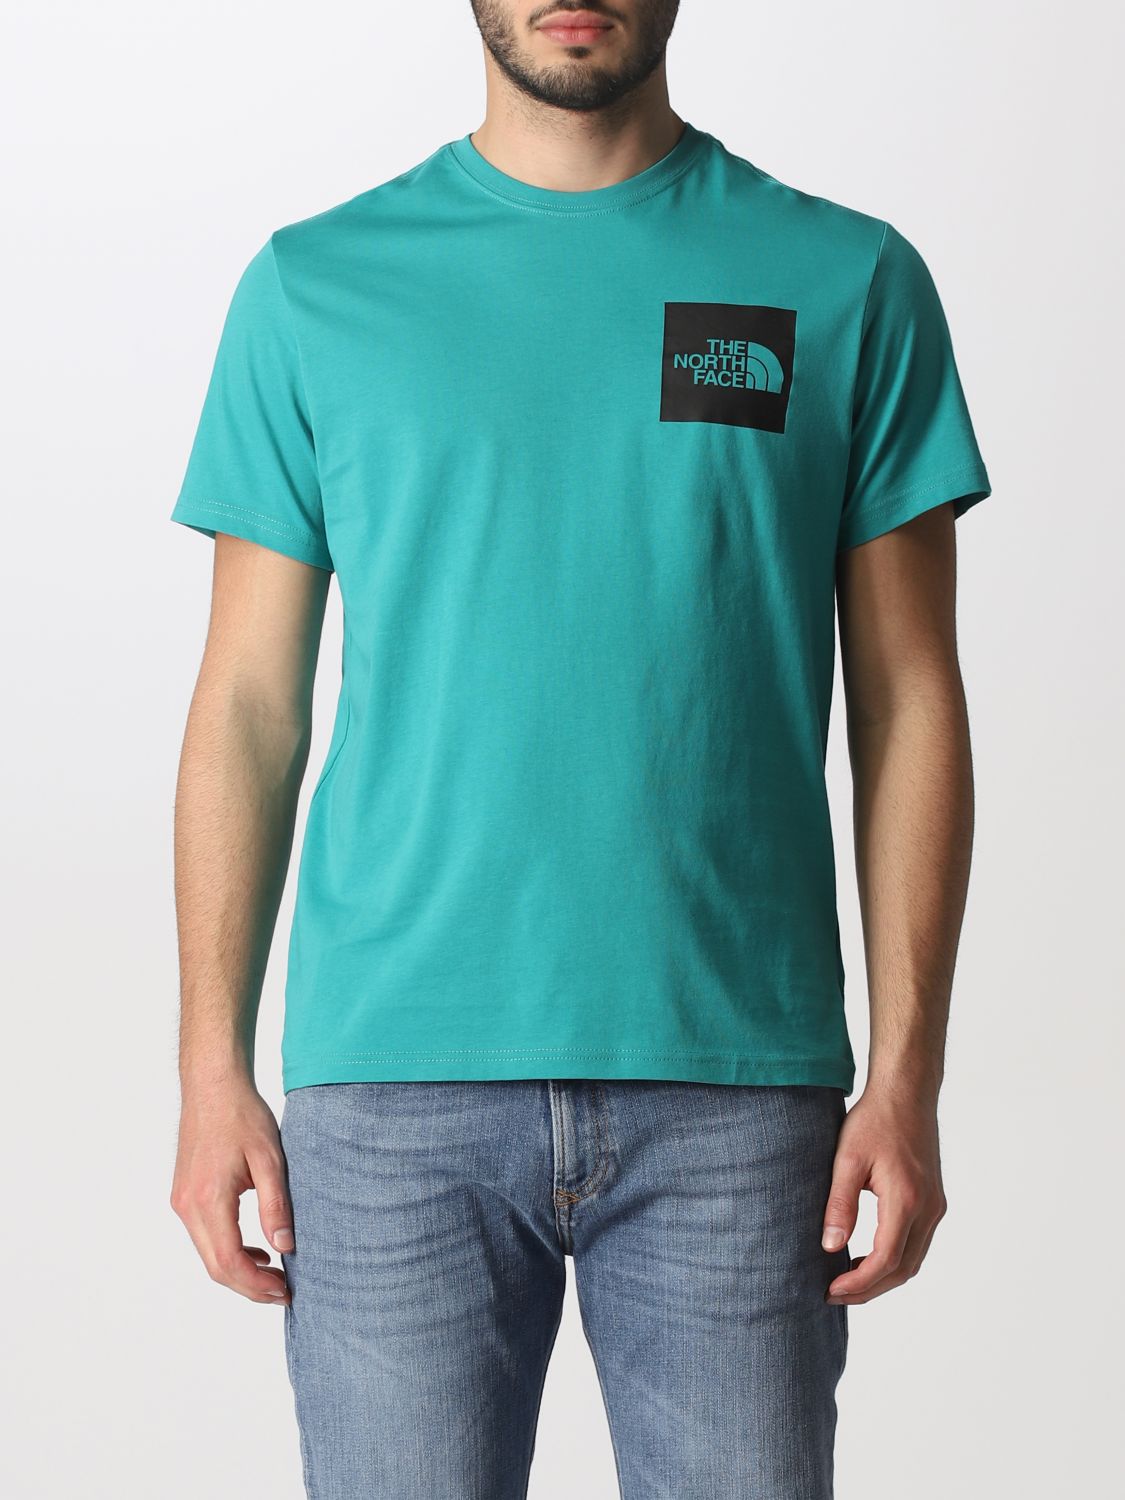 THE NORTH FACE cotton tshirt with logo Green The North Face t